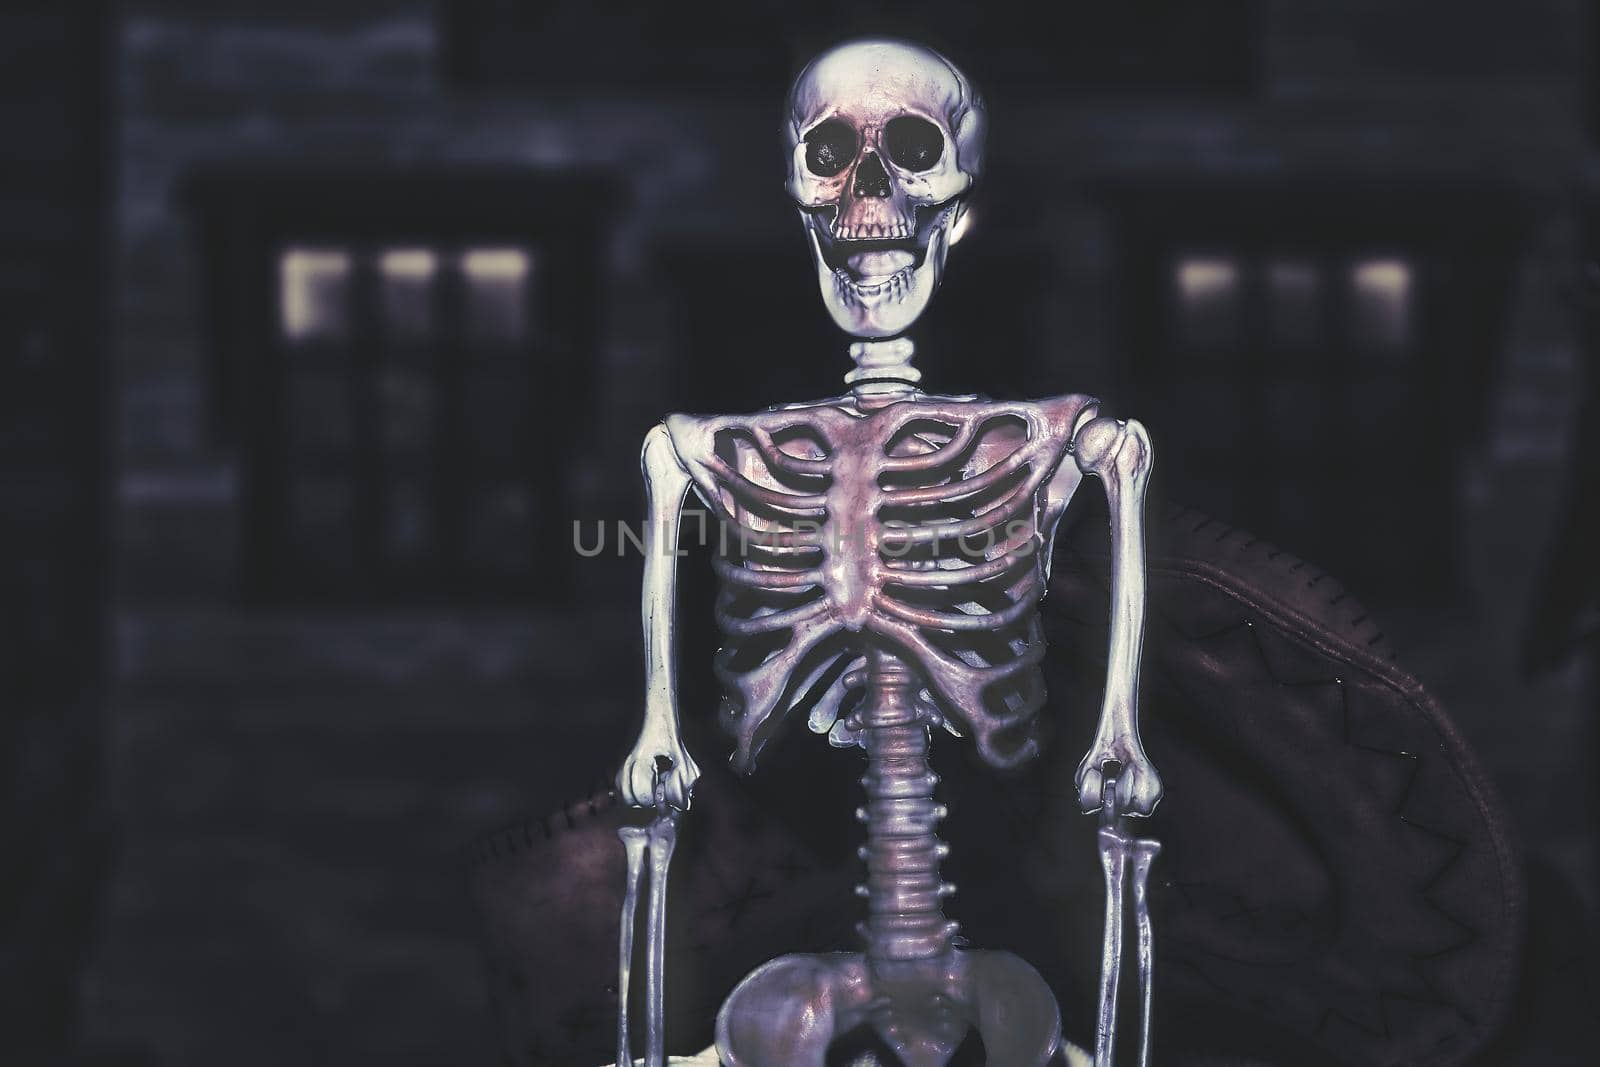 the night of October 31, the eve of All Saints' Day, commonly celebrated by children who dress in costume and go door asking for candy. Pale red purple poisonous halloween skeleton in dark gray room